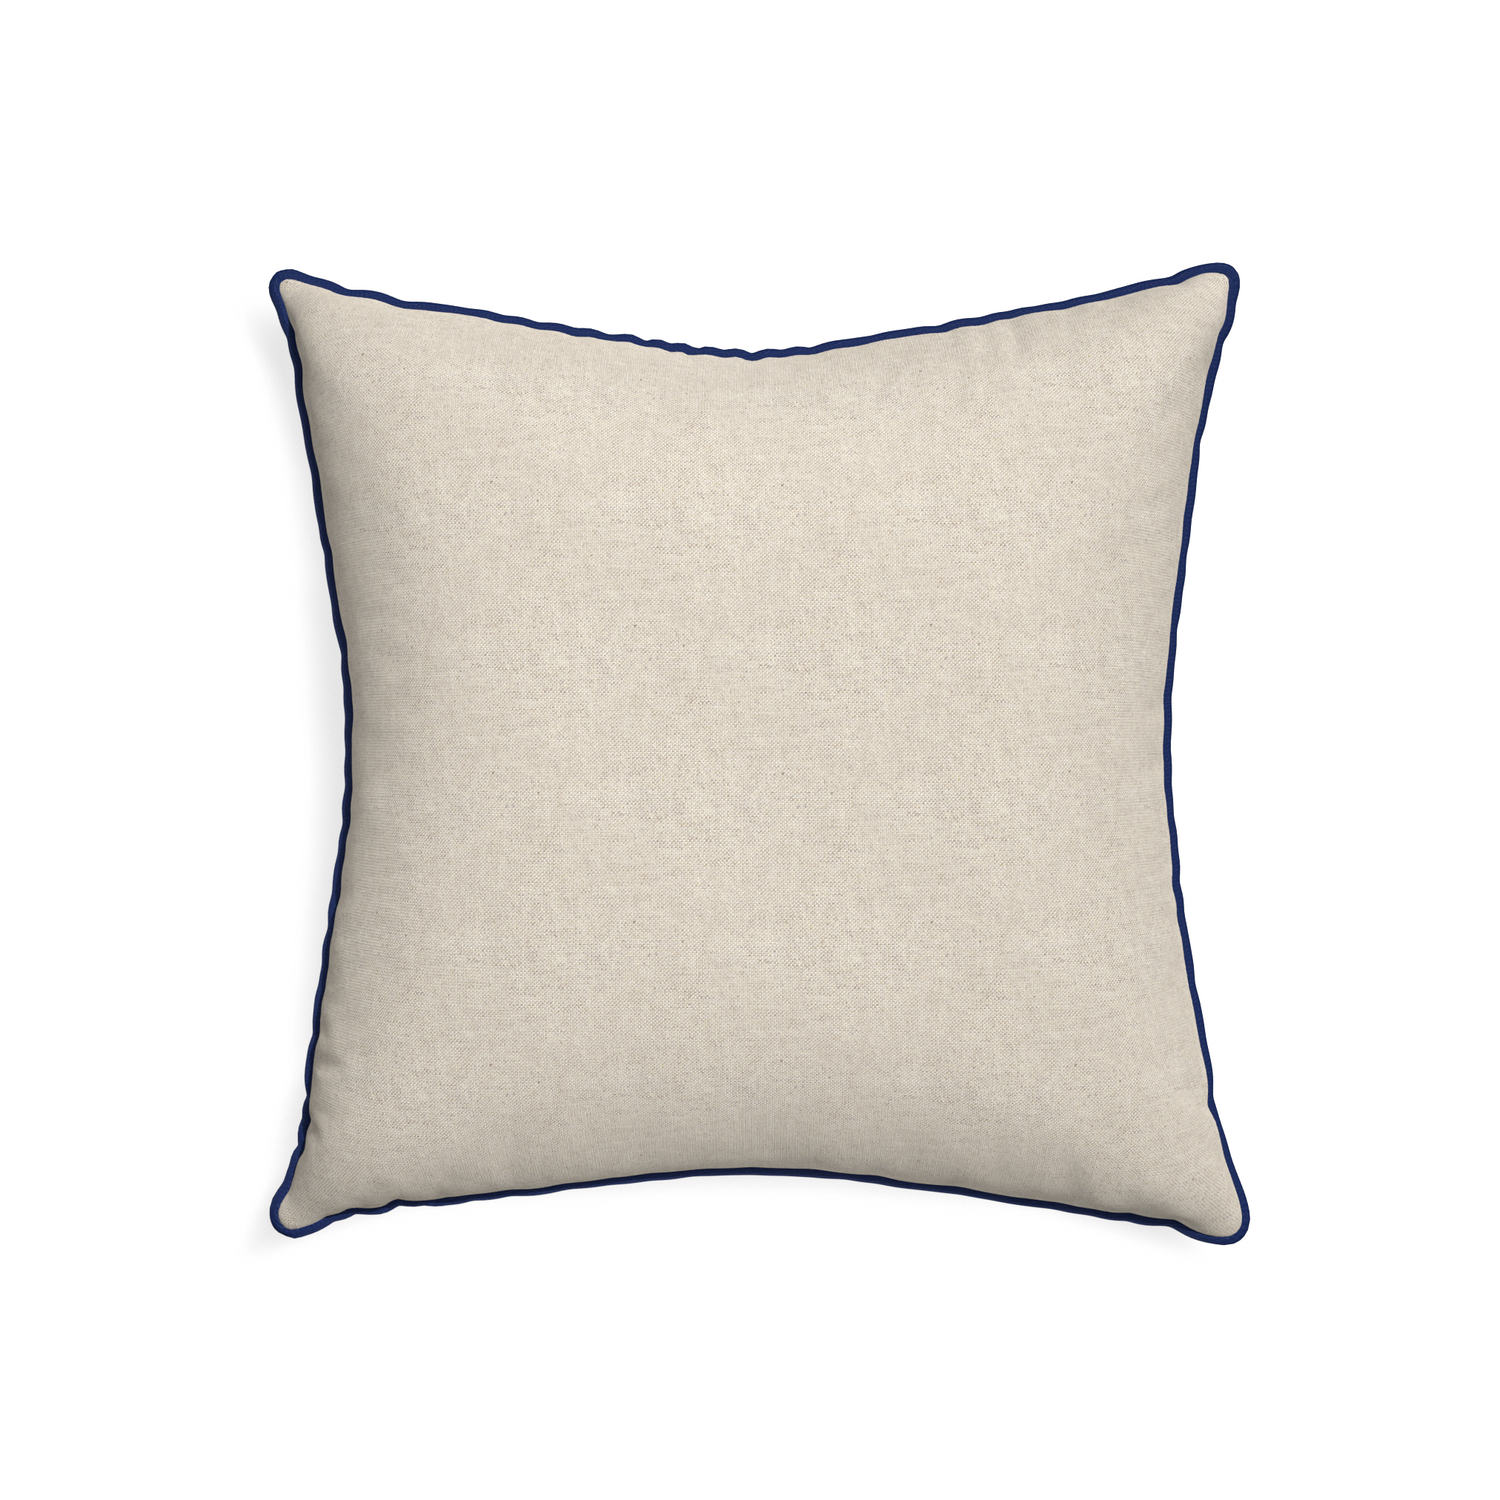 22-square oat custom light brownpillow with midnight piping on white background